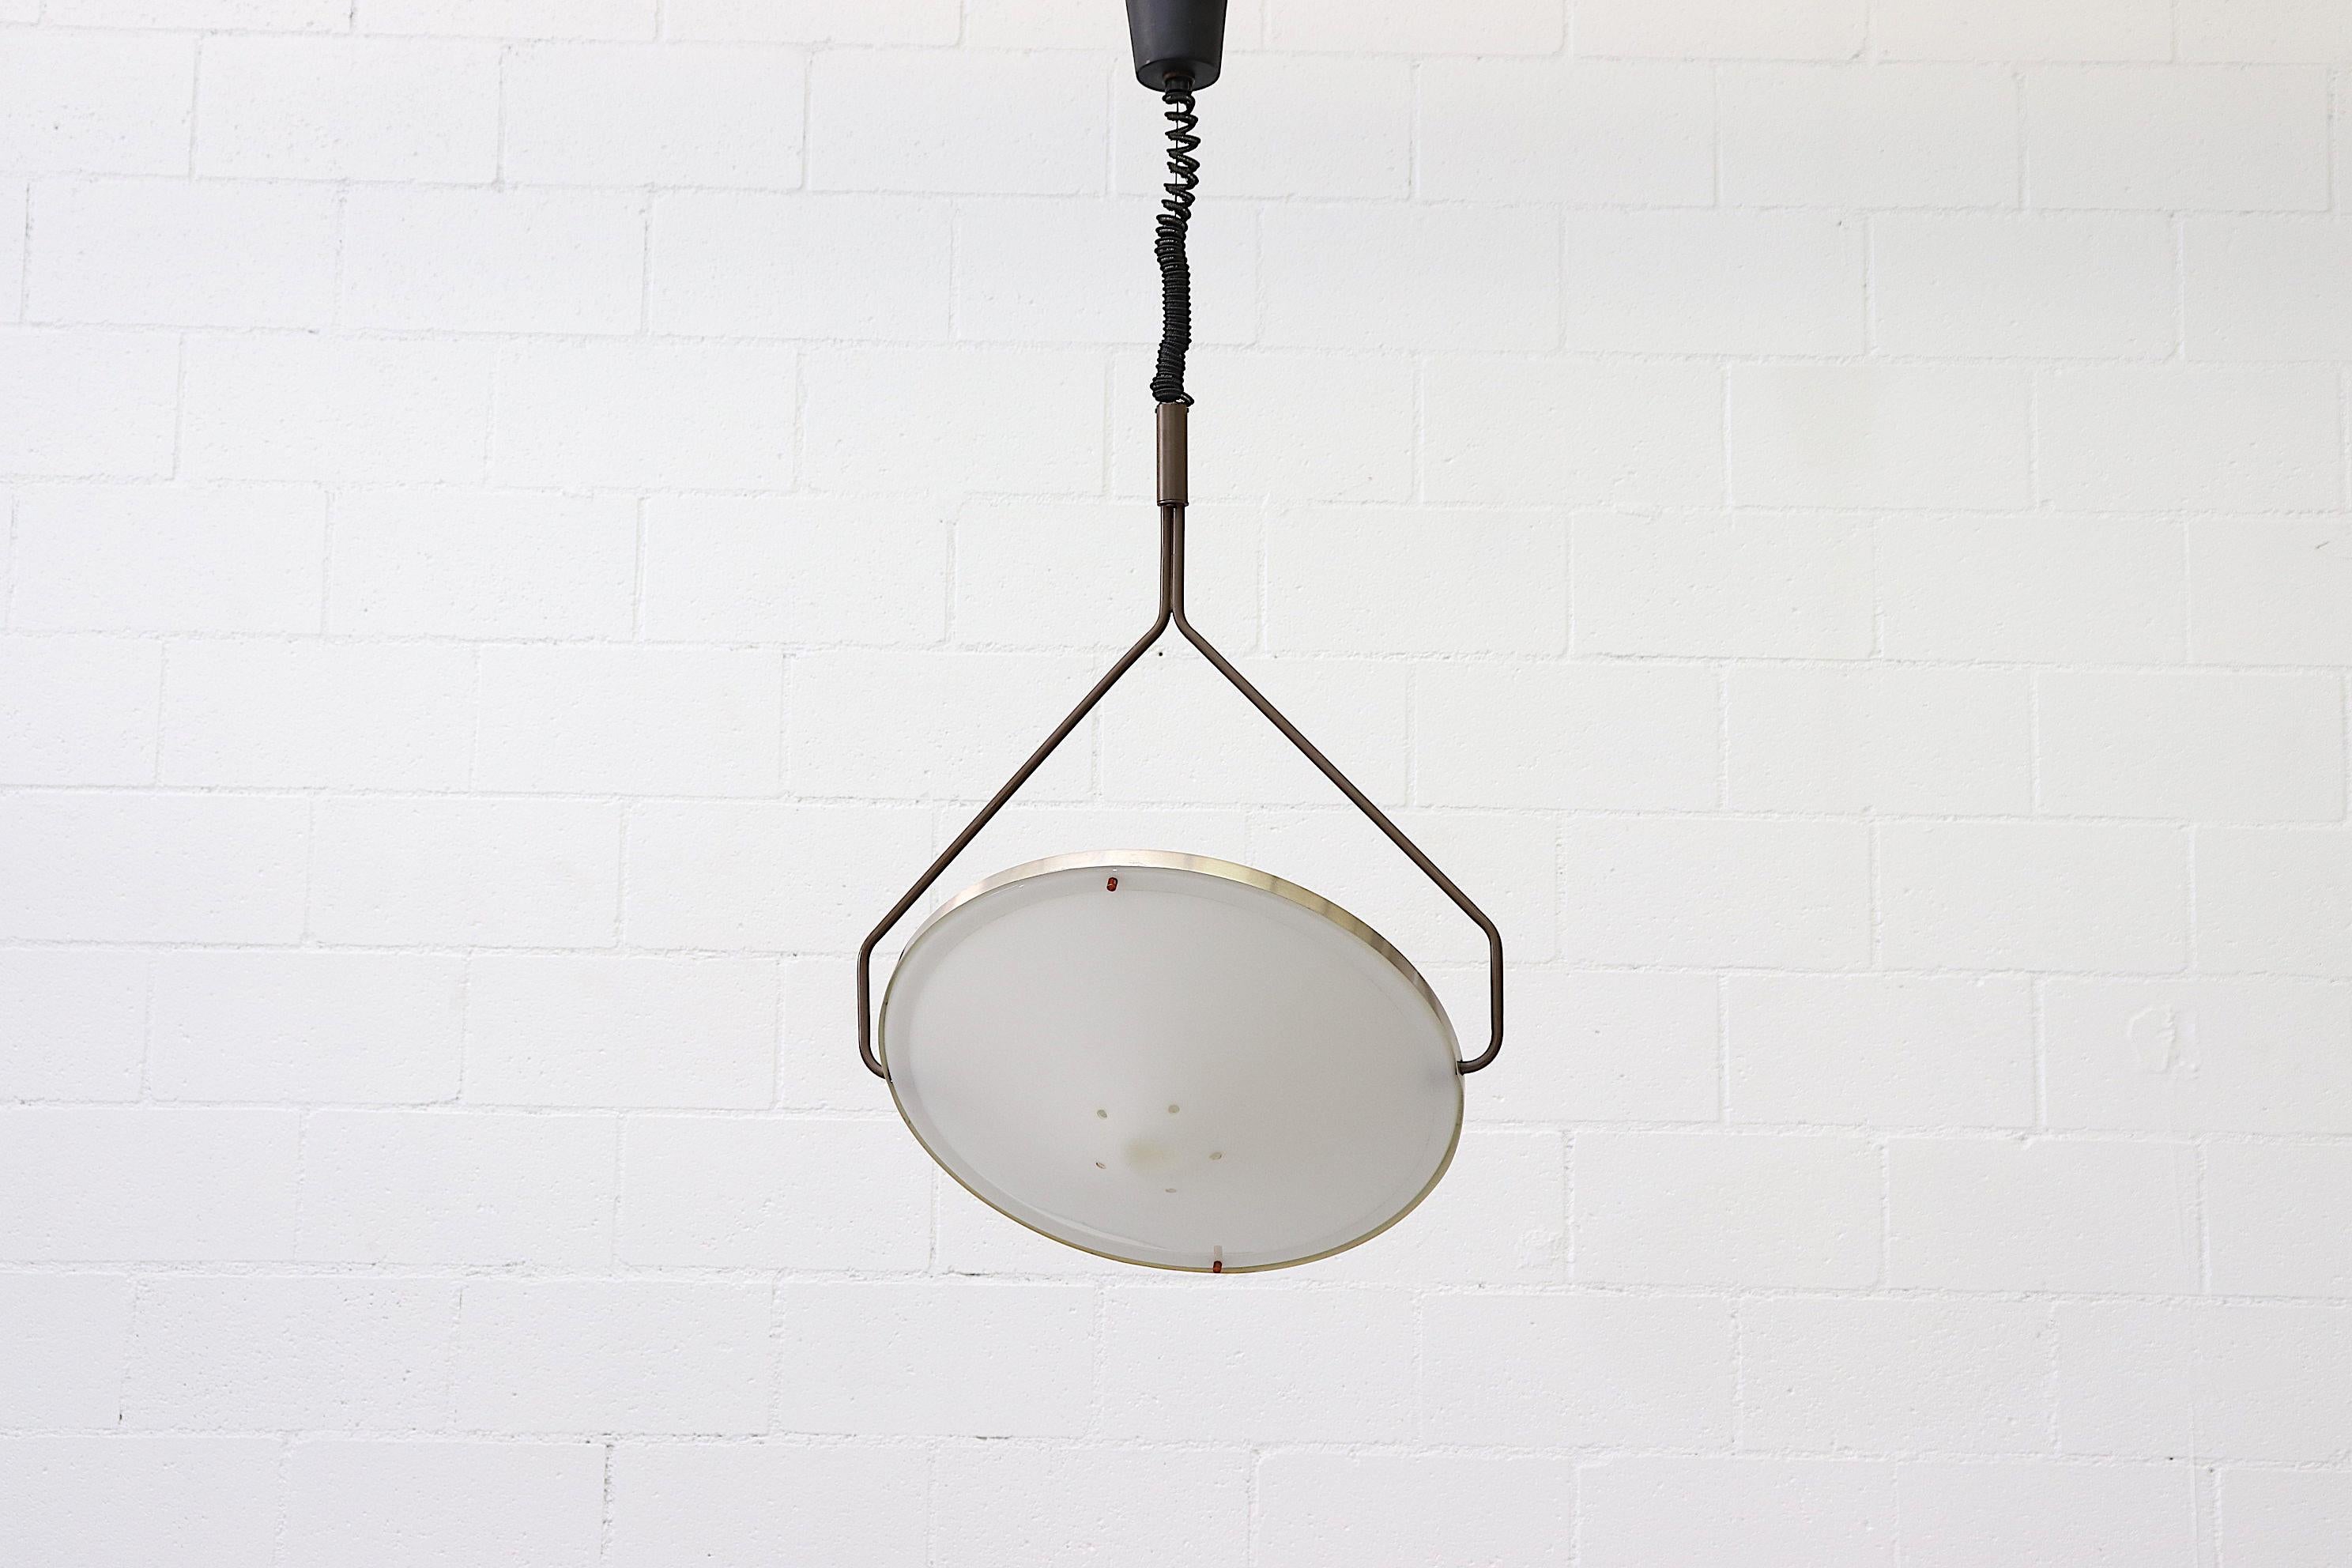 Beautiful 1970s RAAK Kompas ceiling lamp with anodized aluminum and plexiglass. Groundbreaking design with height adjustable suspension frame and independently rotating light source for effortless light redirection. Functional and stylish in